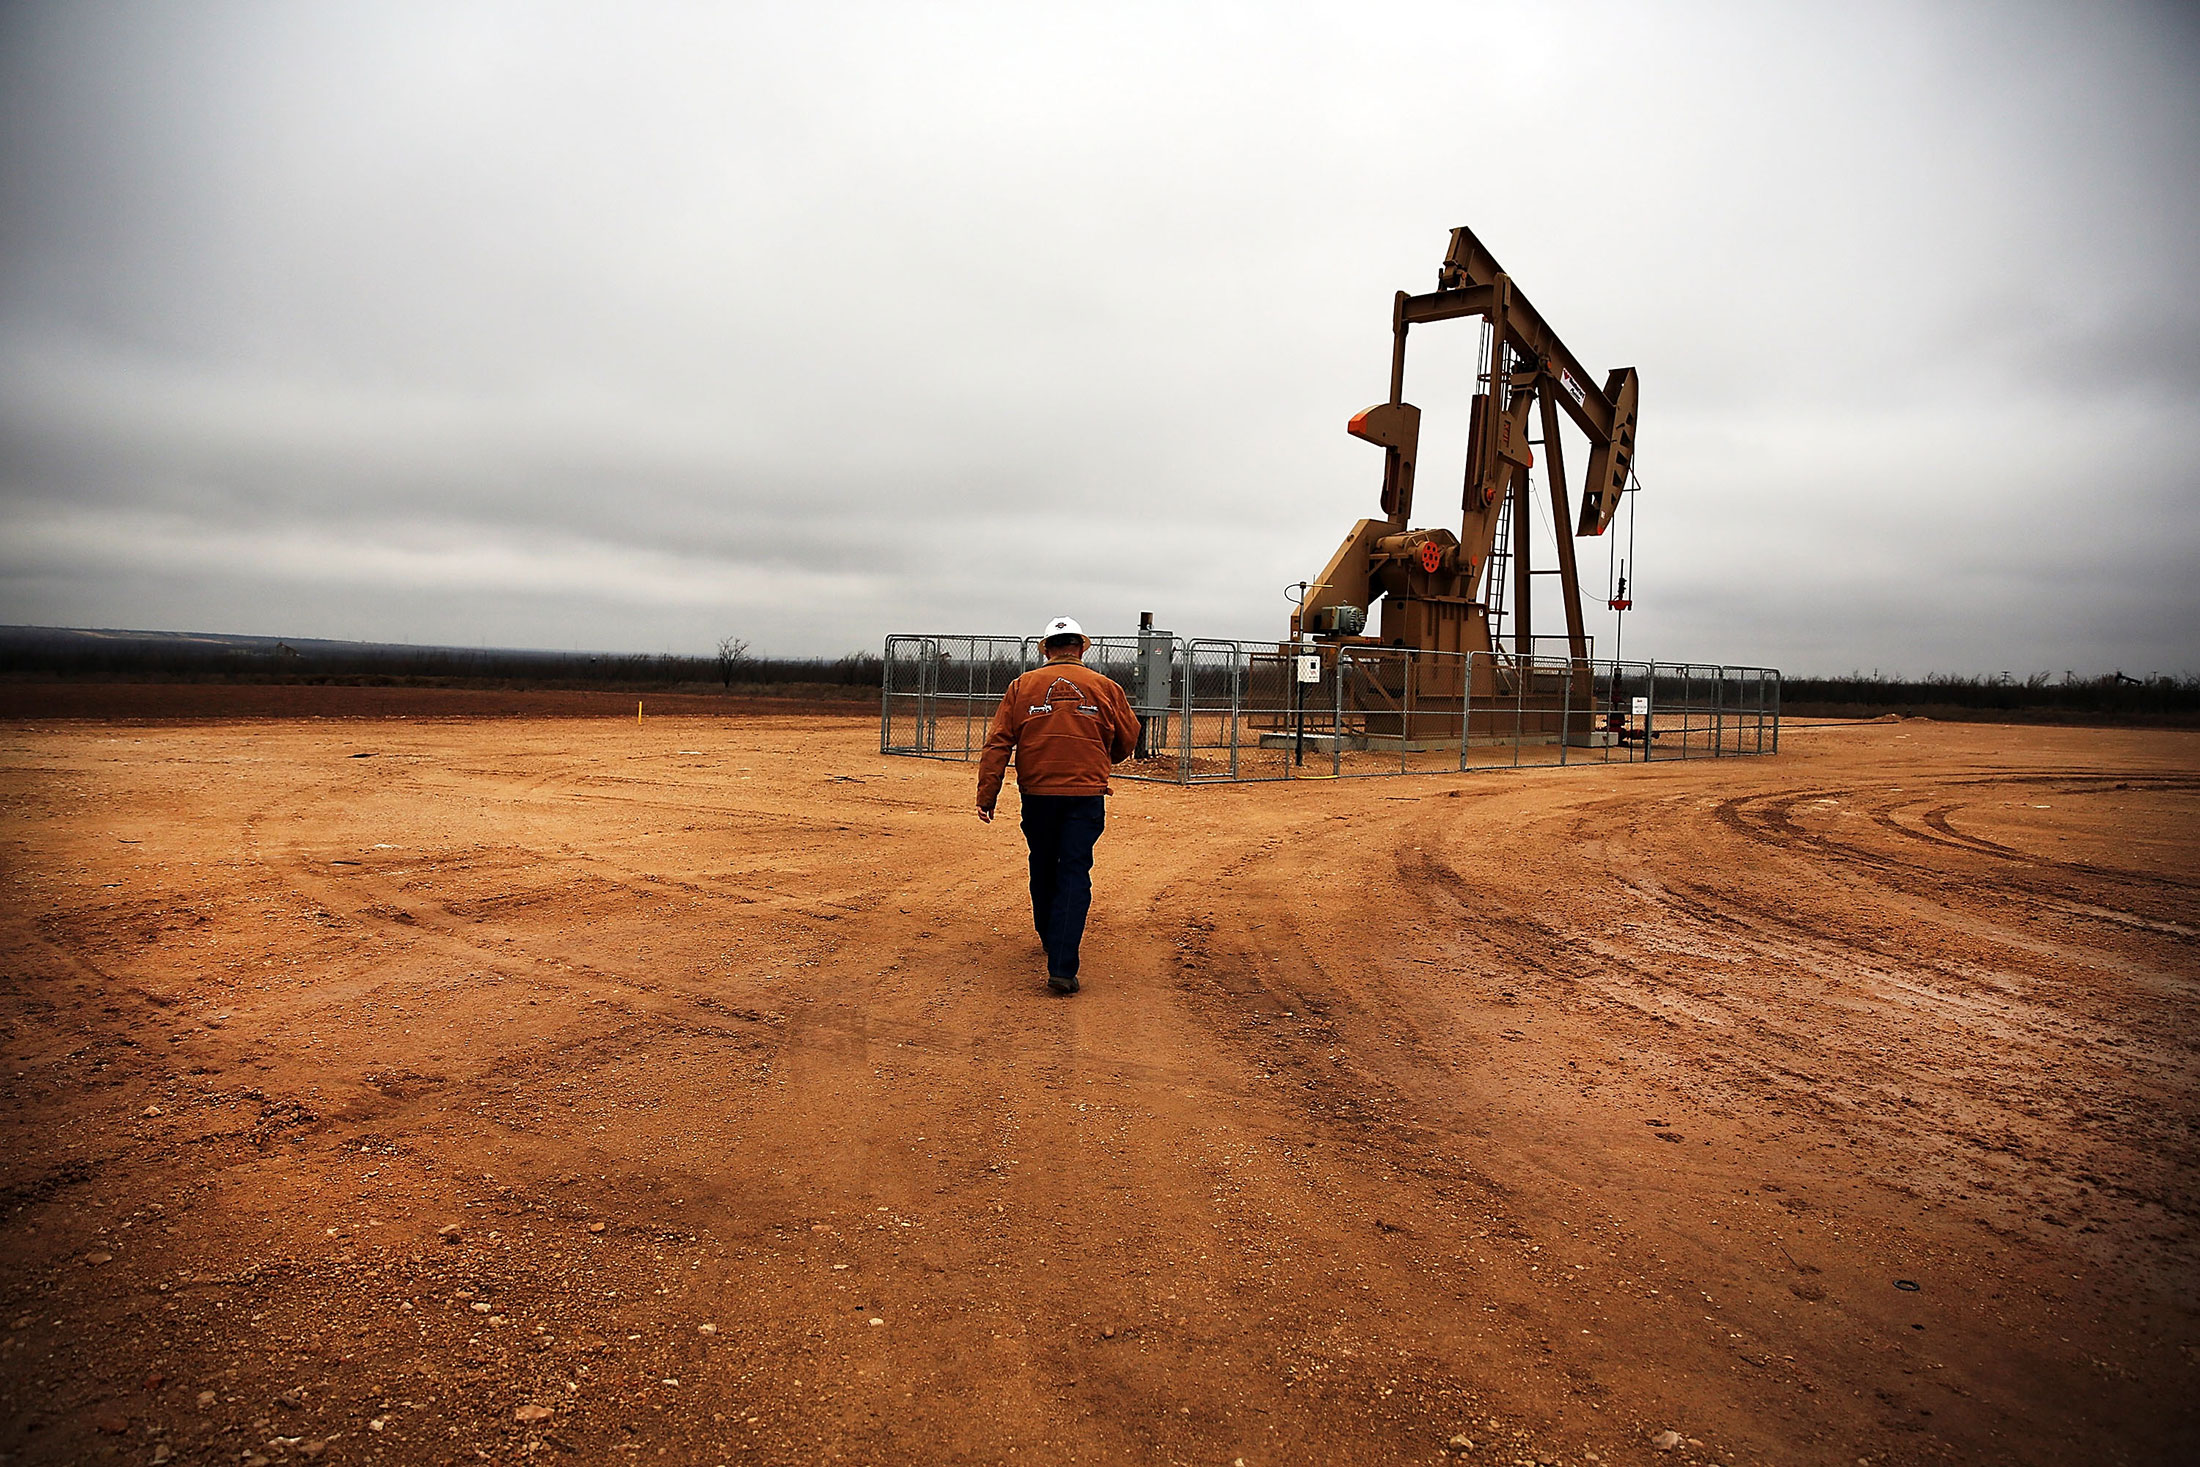 An oil well in the Permian Basin on Feb. 5, 2015 in Garden City, Texas. (Photo by Spencer Platt/Getty Images)
